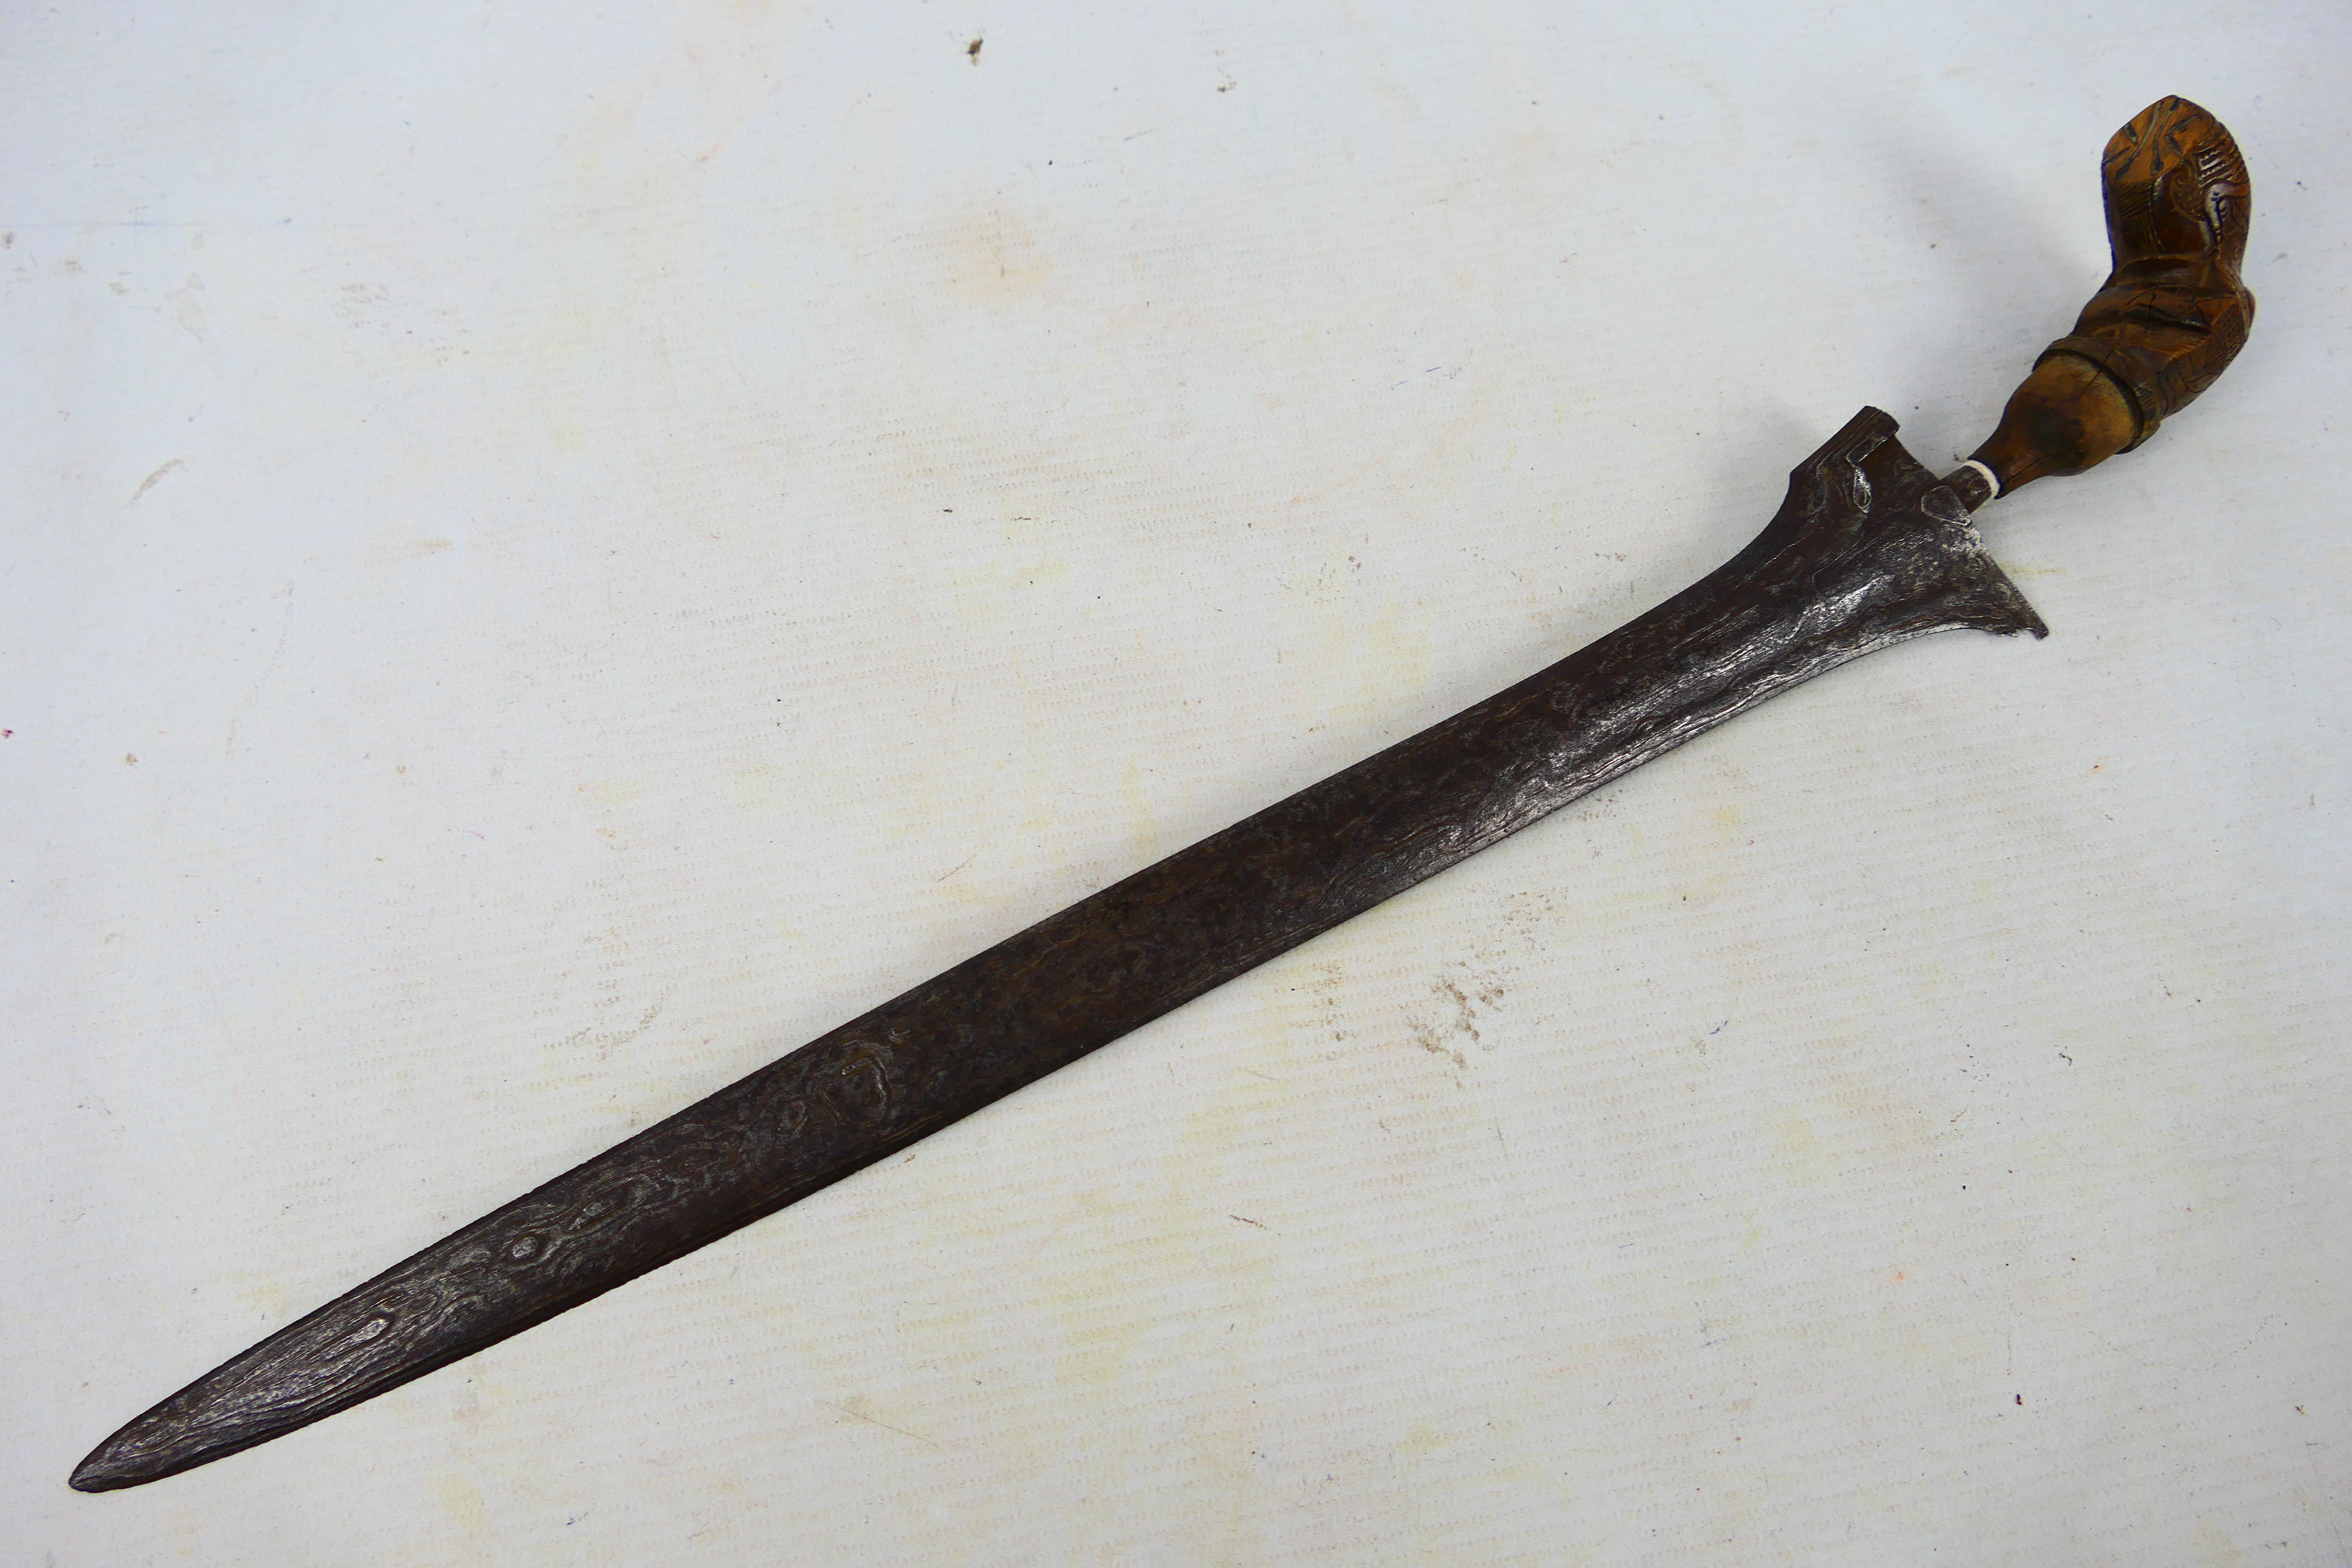 A late 19th or early 20th century Indonesian kris, 39 cm (l) blade and shaped carved hilt.